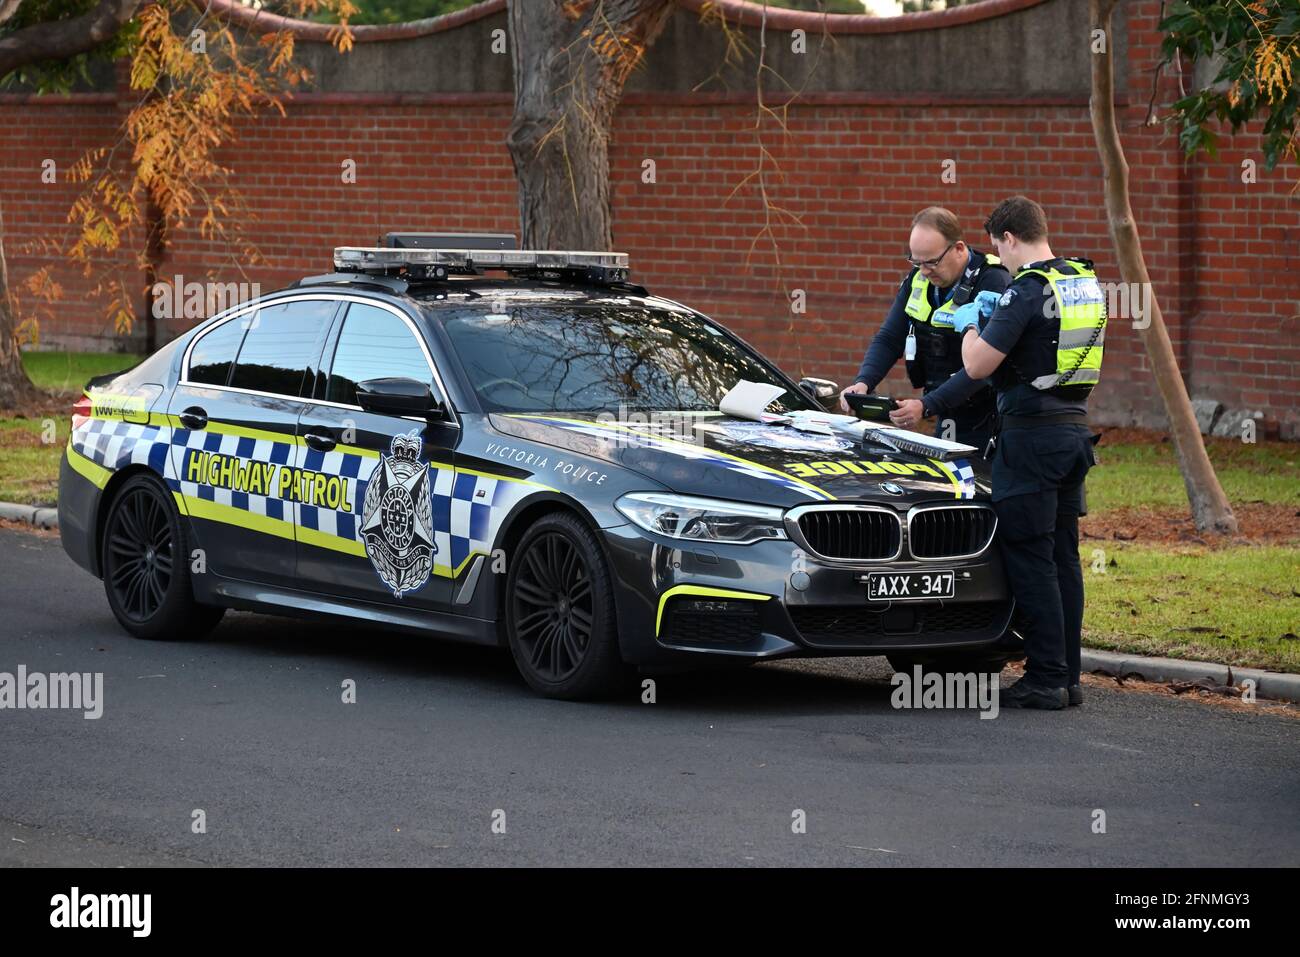 A Victoria Police Highway Patrol BMW M5 parked on the side of the road, while two police officers perform their duty Stock Photo